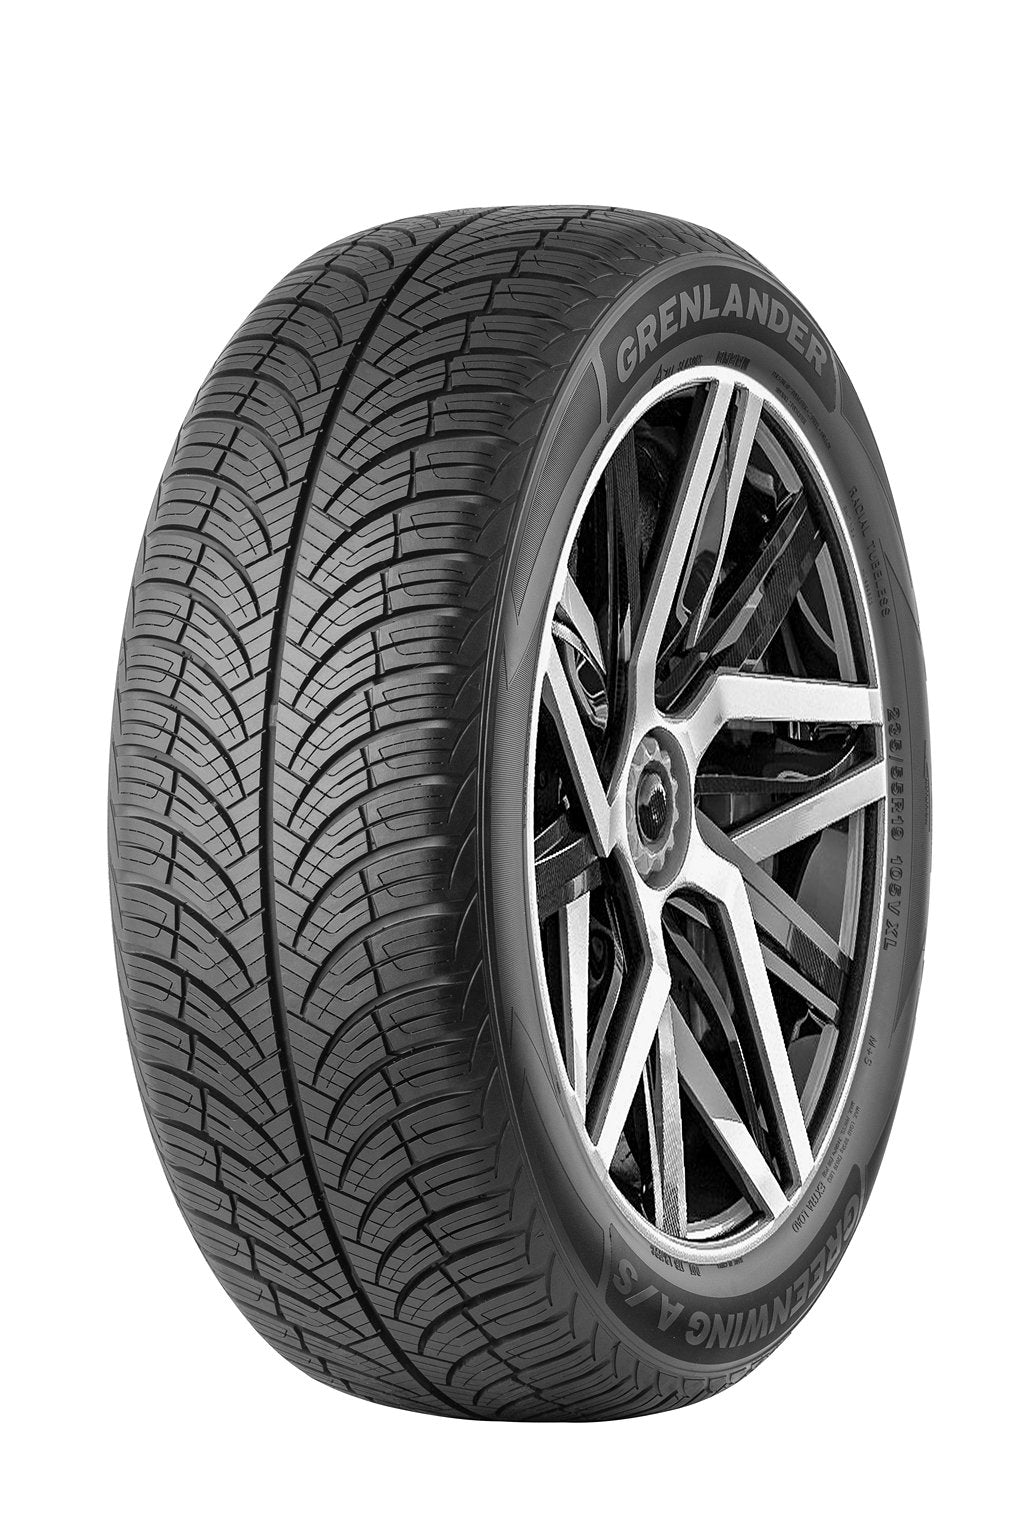 225/60R17 GRENLANDER GREENWING A/S ALL WEATHER - Toee Tire